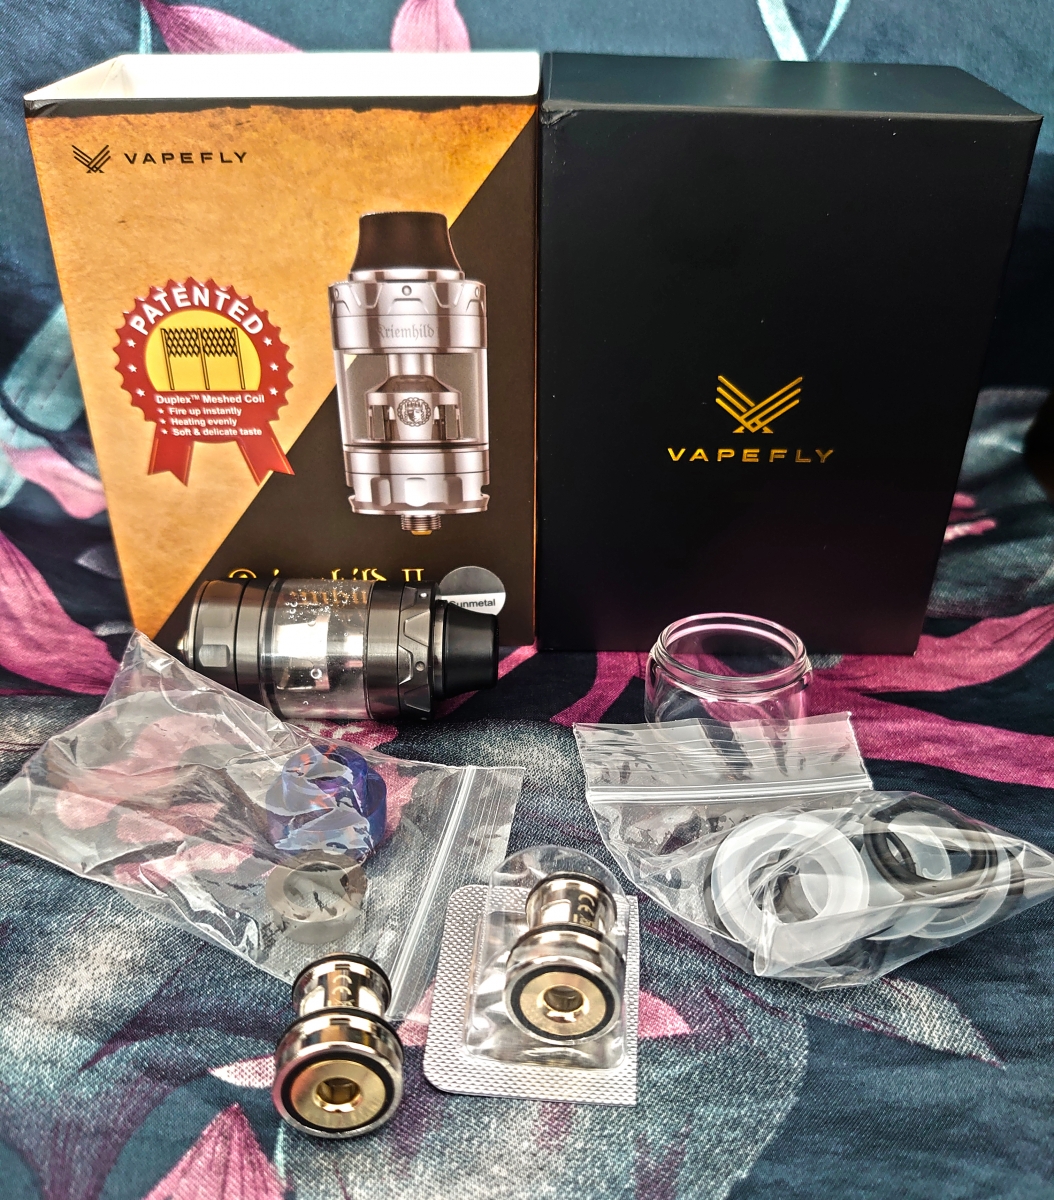 Vapefly Kriemhild 2 box and contents